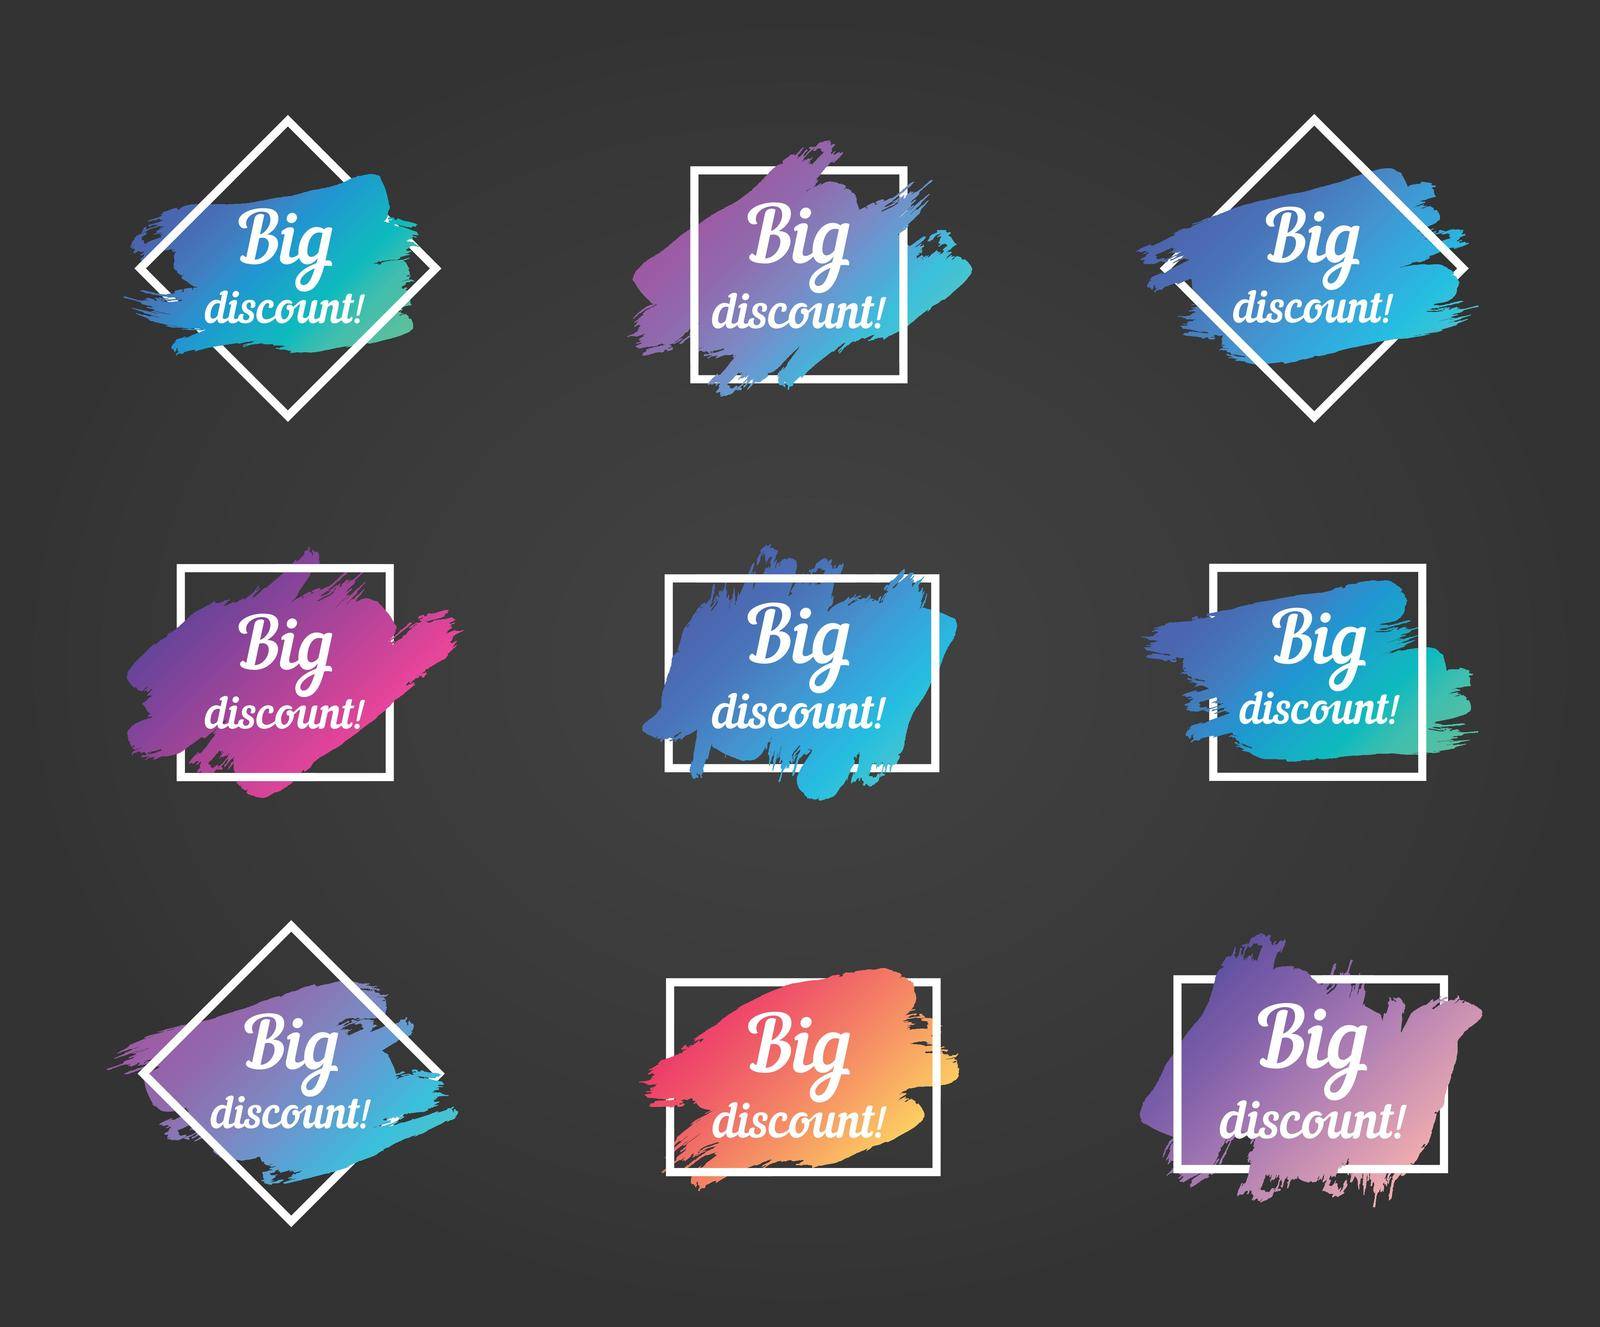 big discount promo phrase. big discount stock vector illustrations with painted gradient brush strokes over square frames for advertising labels, stickers, banners, leaflets, badges, tags, posters